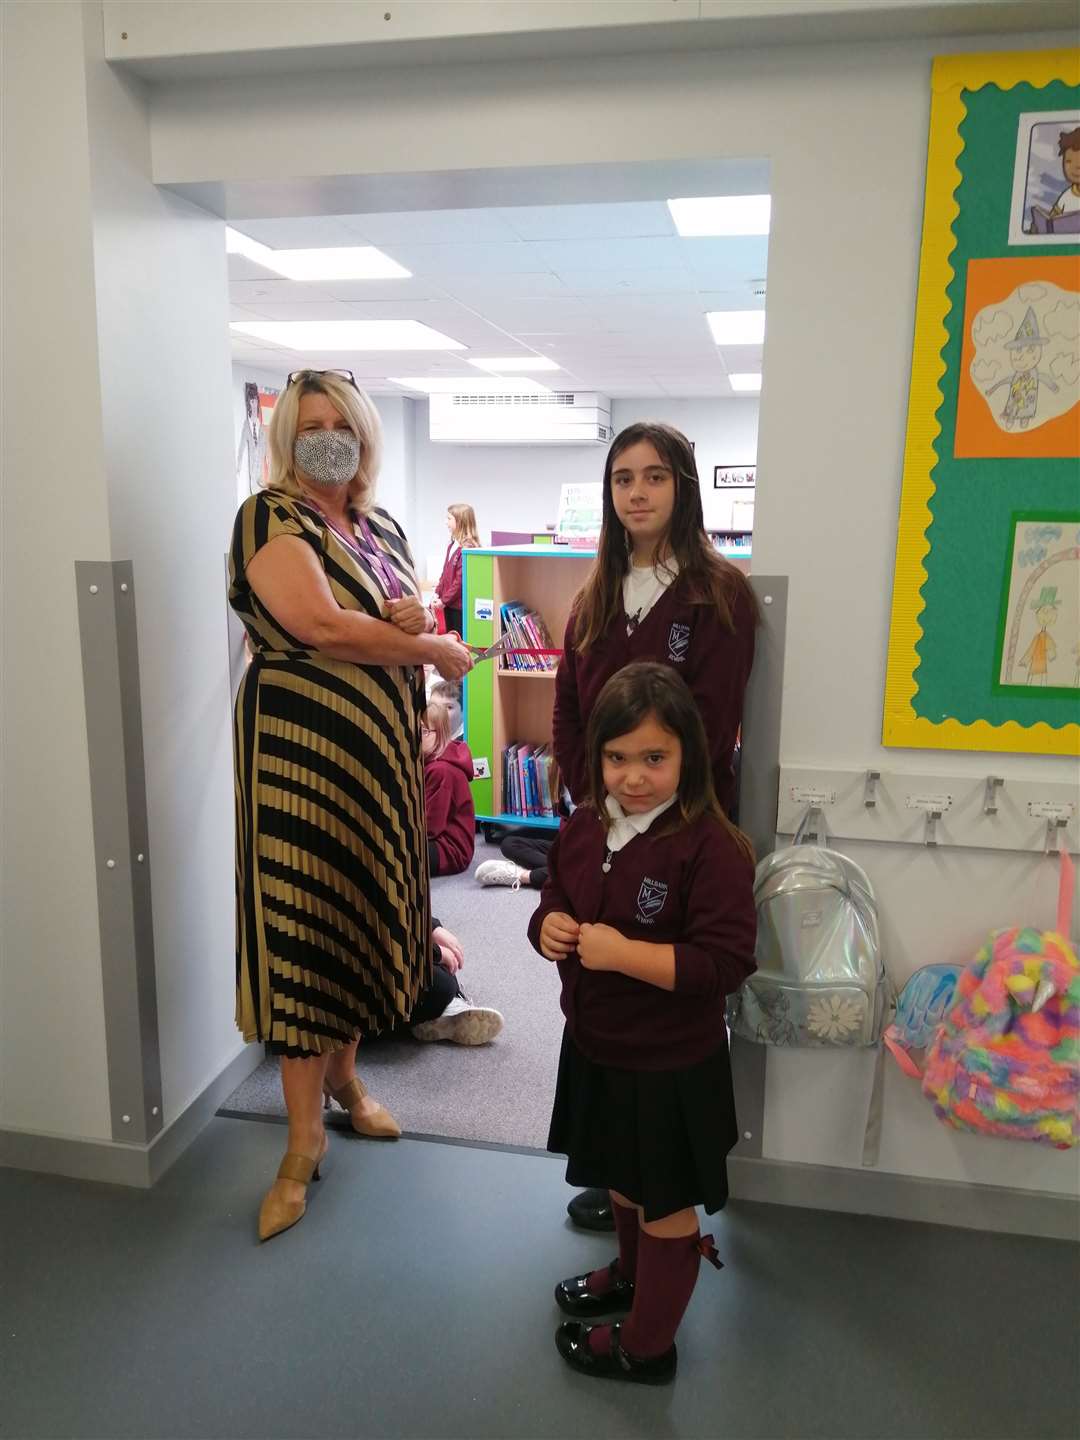 Chief education officer Vivienne Cross is joined by pupils Zuri Andrew and Lucie Scott in declaring the library open.